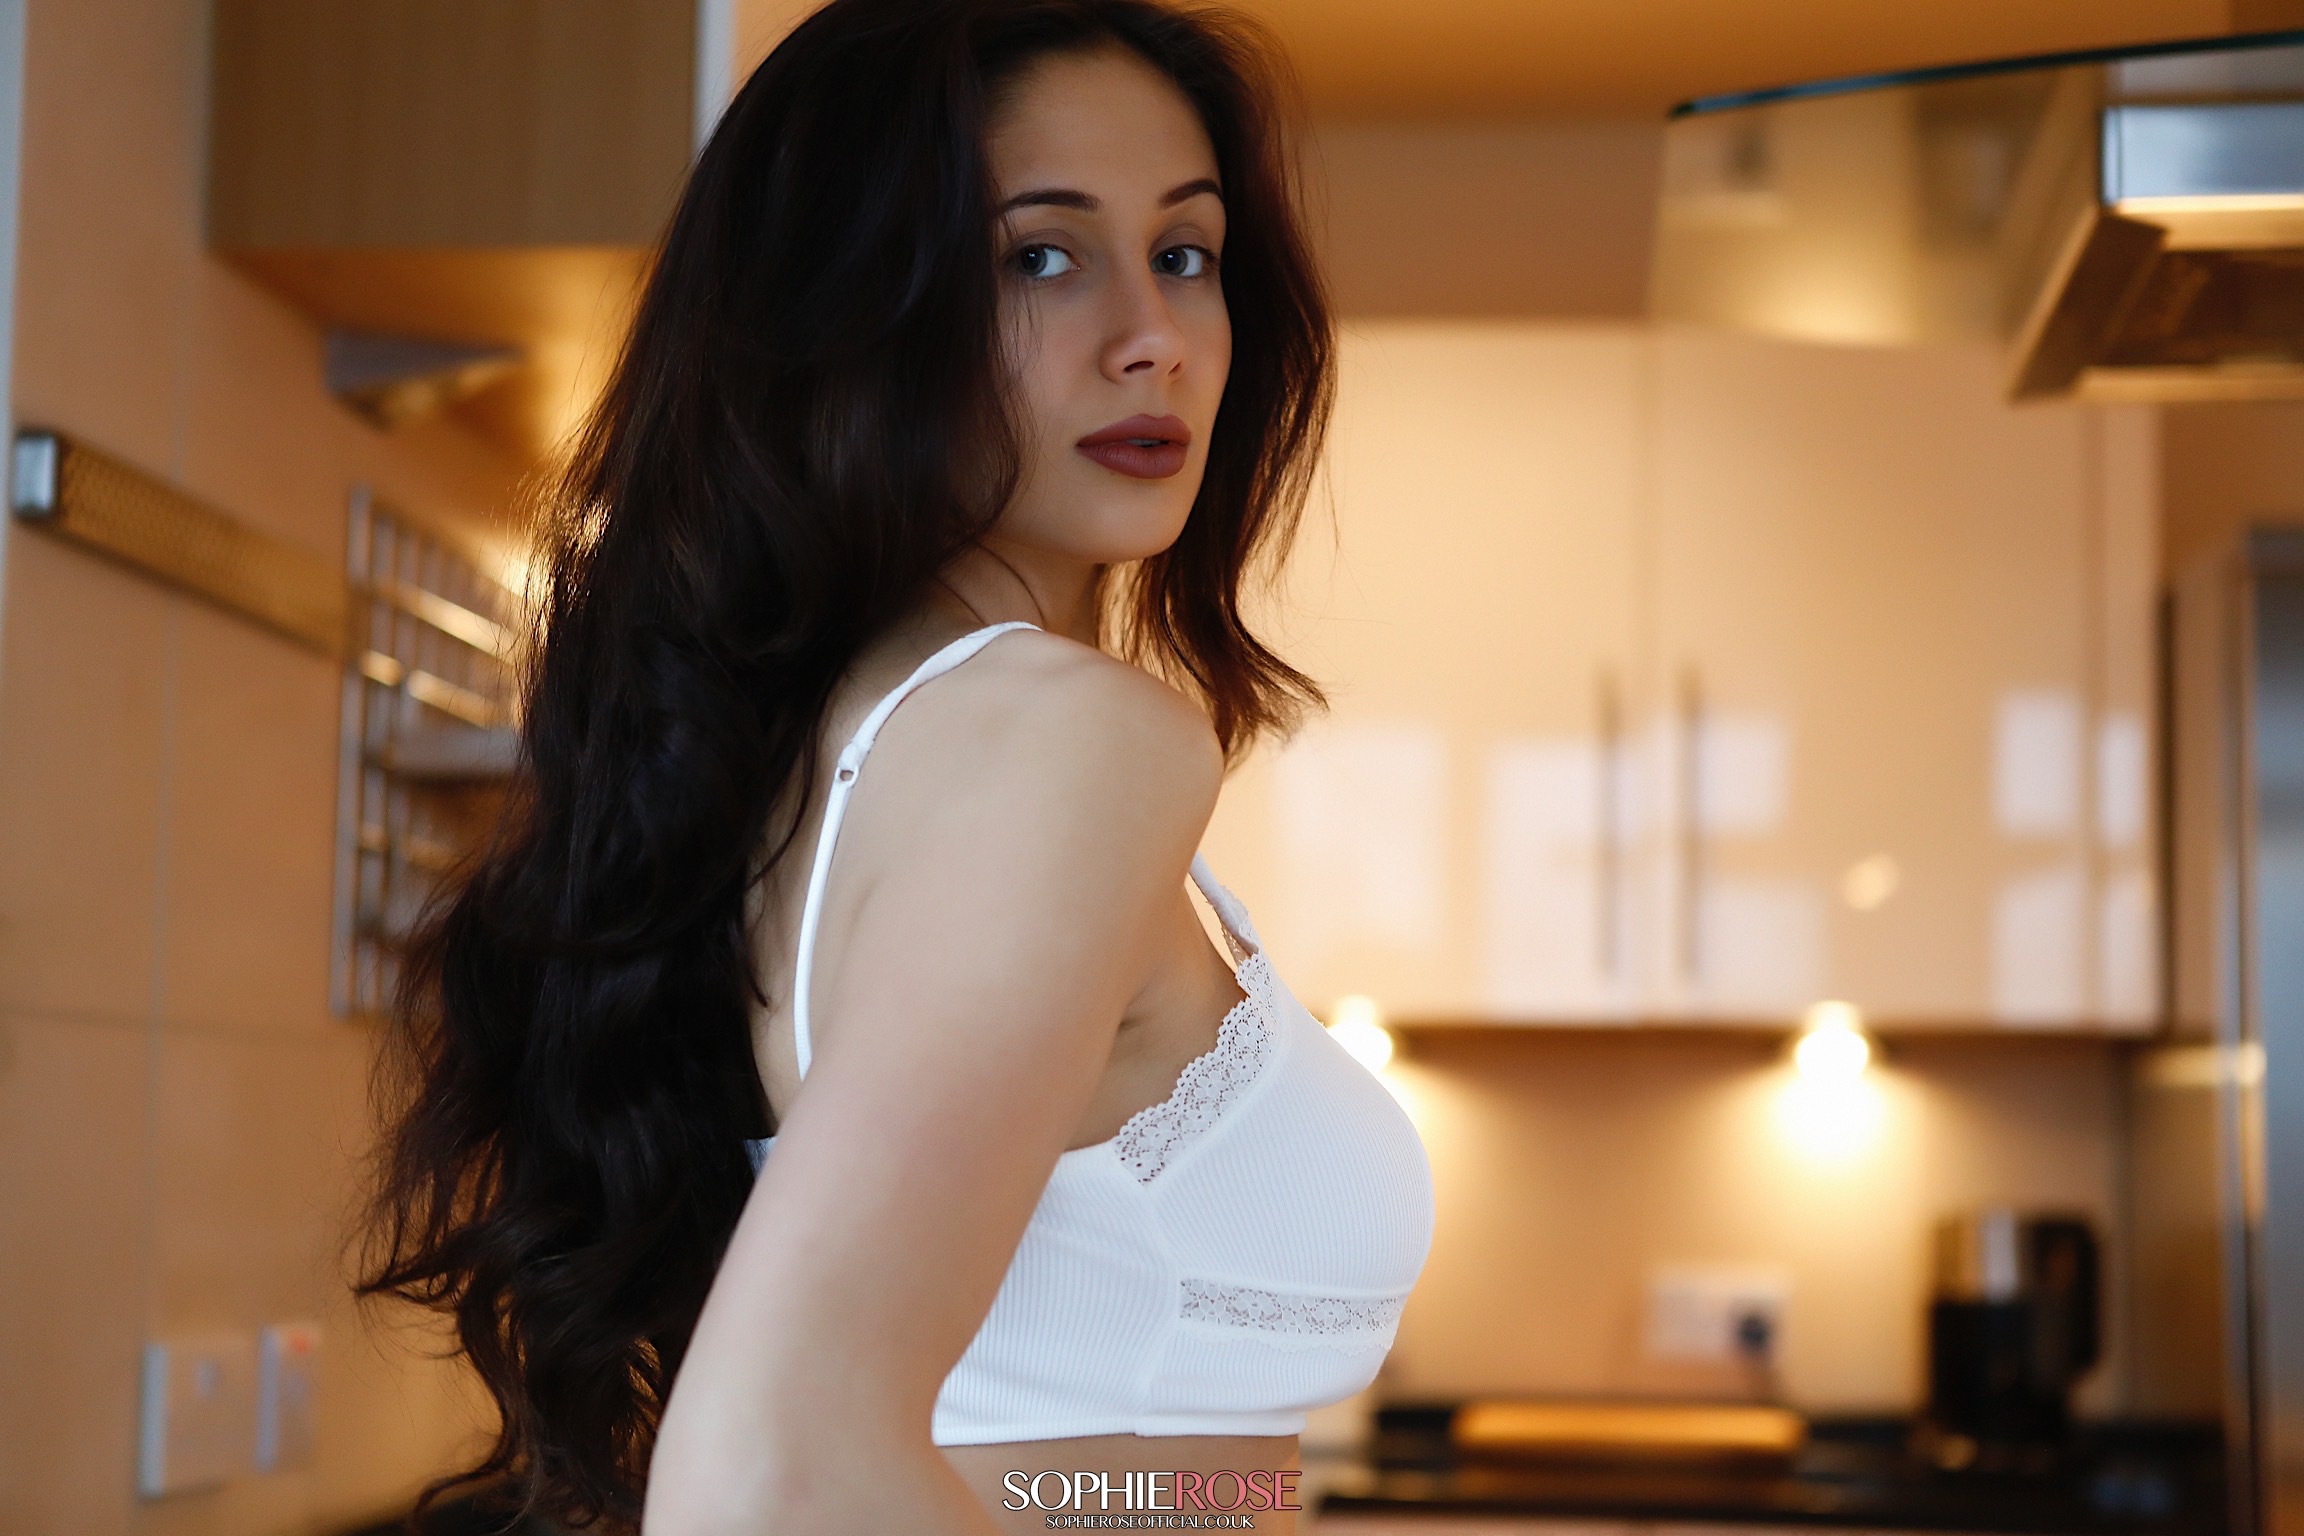 What would you like for breakfast? – 5:51 Minutes HD Video